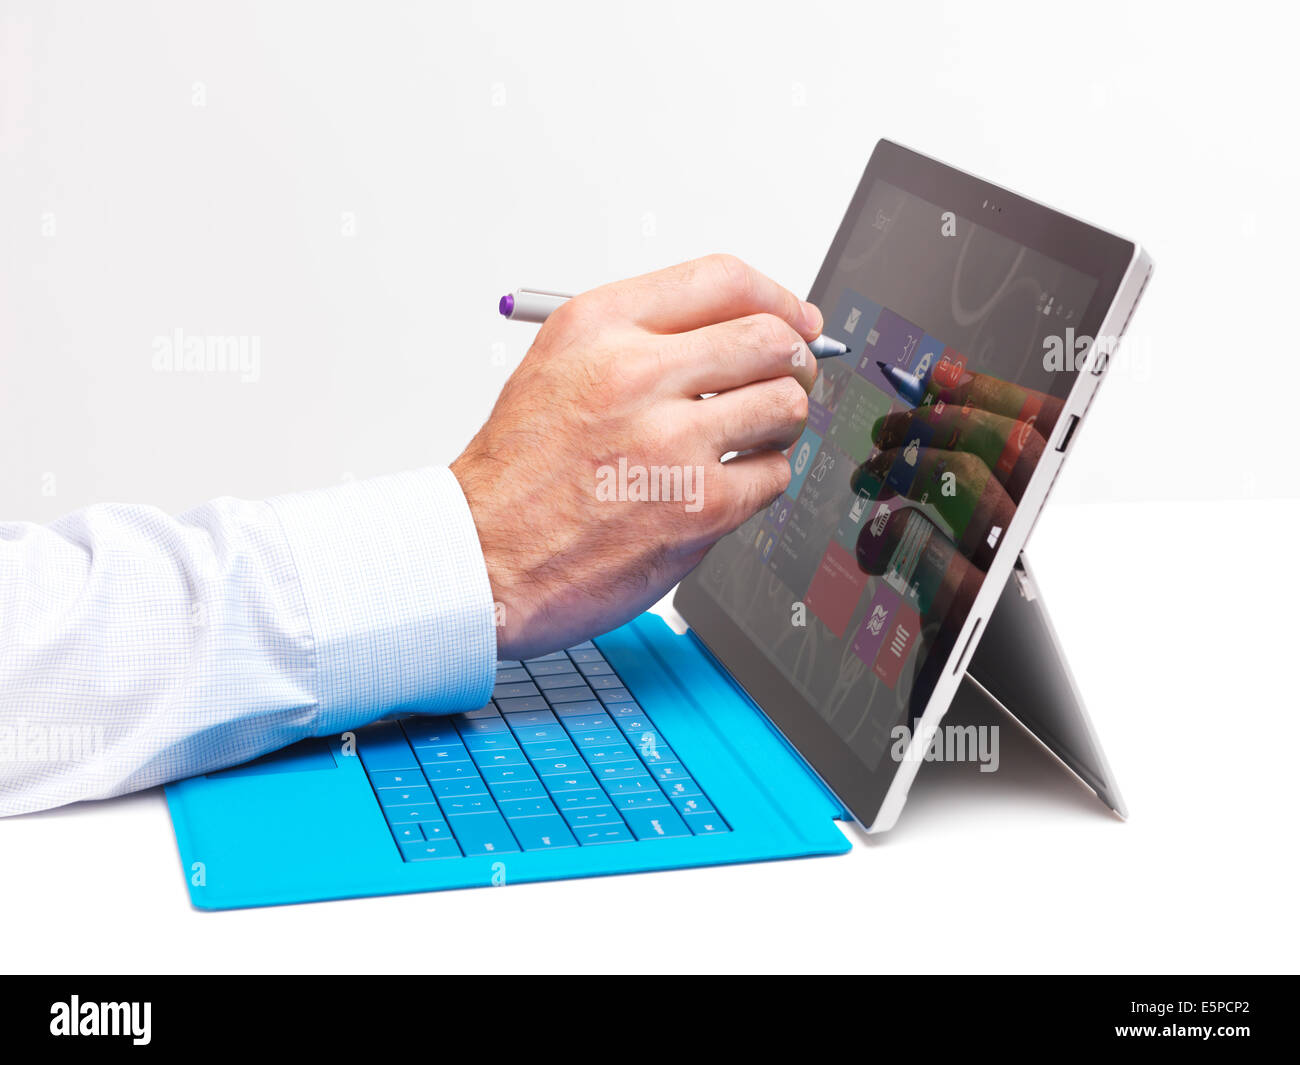 Person's hand with a pen touching display of Microsoft Surface Pro 3 tablet computer isolated on white background Stock Photo